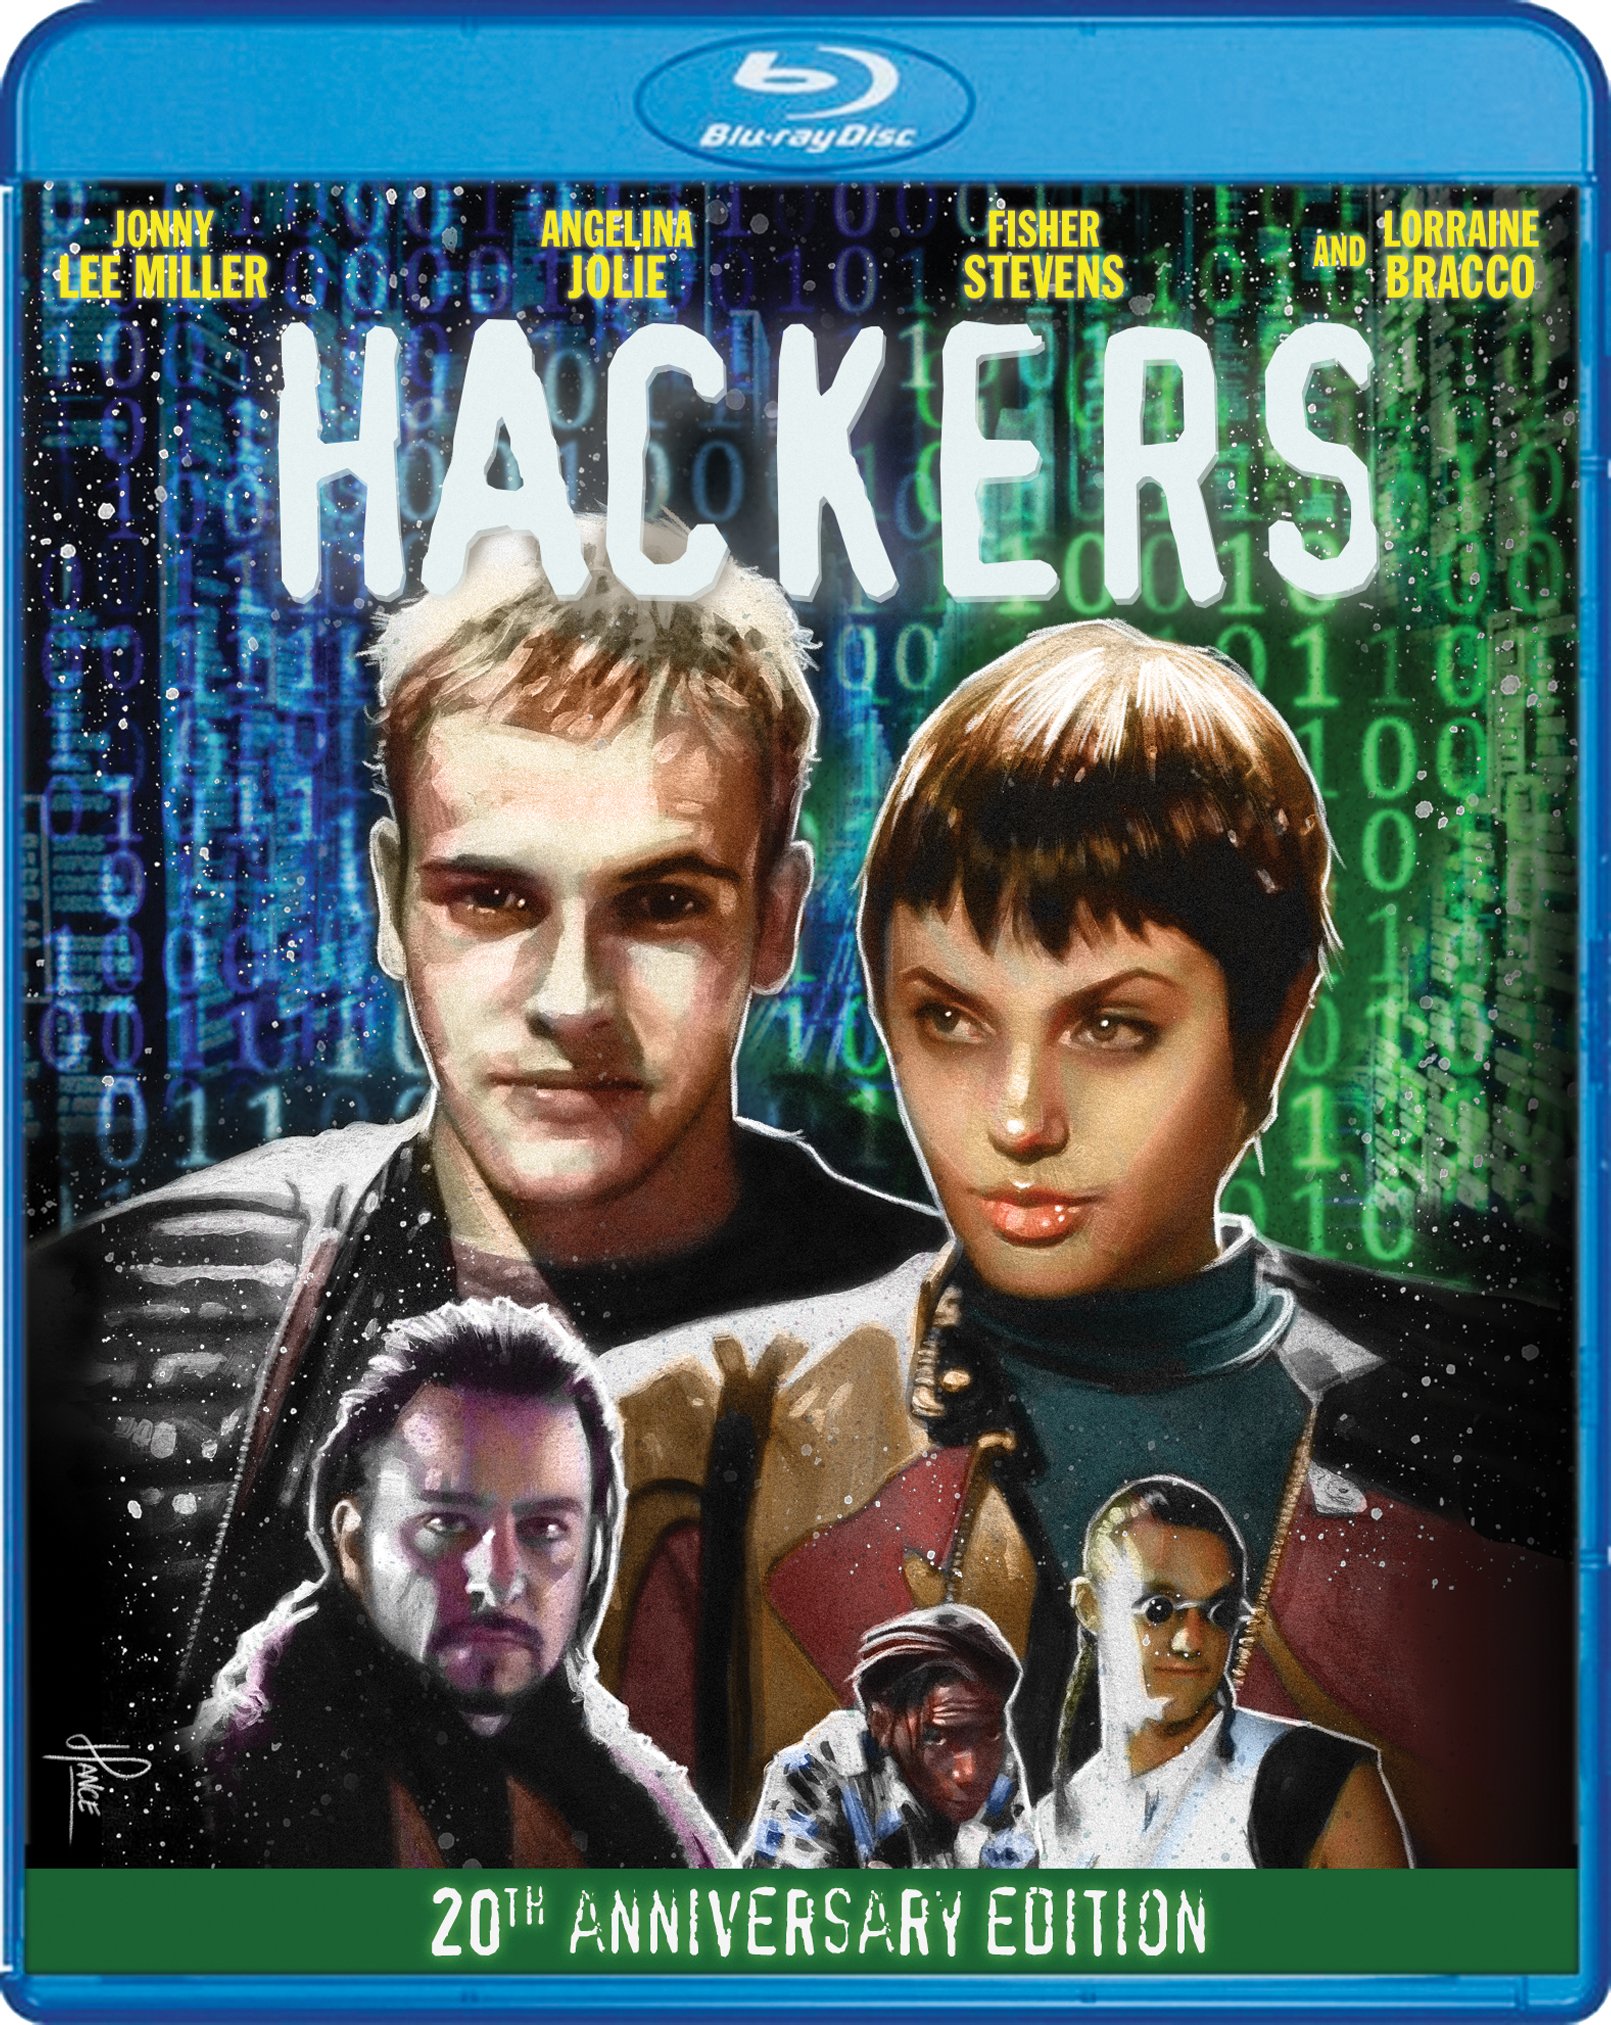 Hackers 20th Anniversary Edition Blu-Ray Review